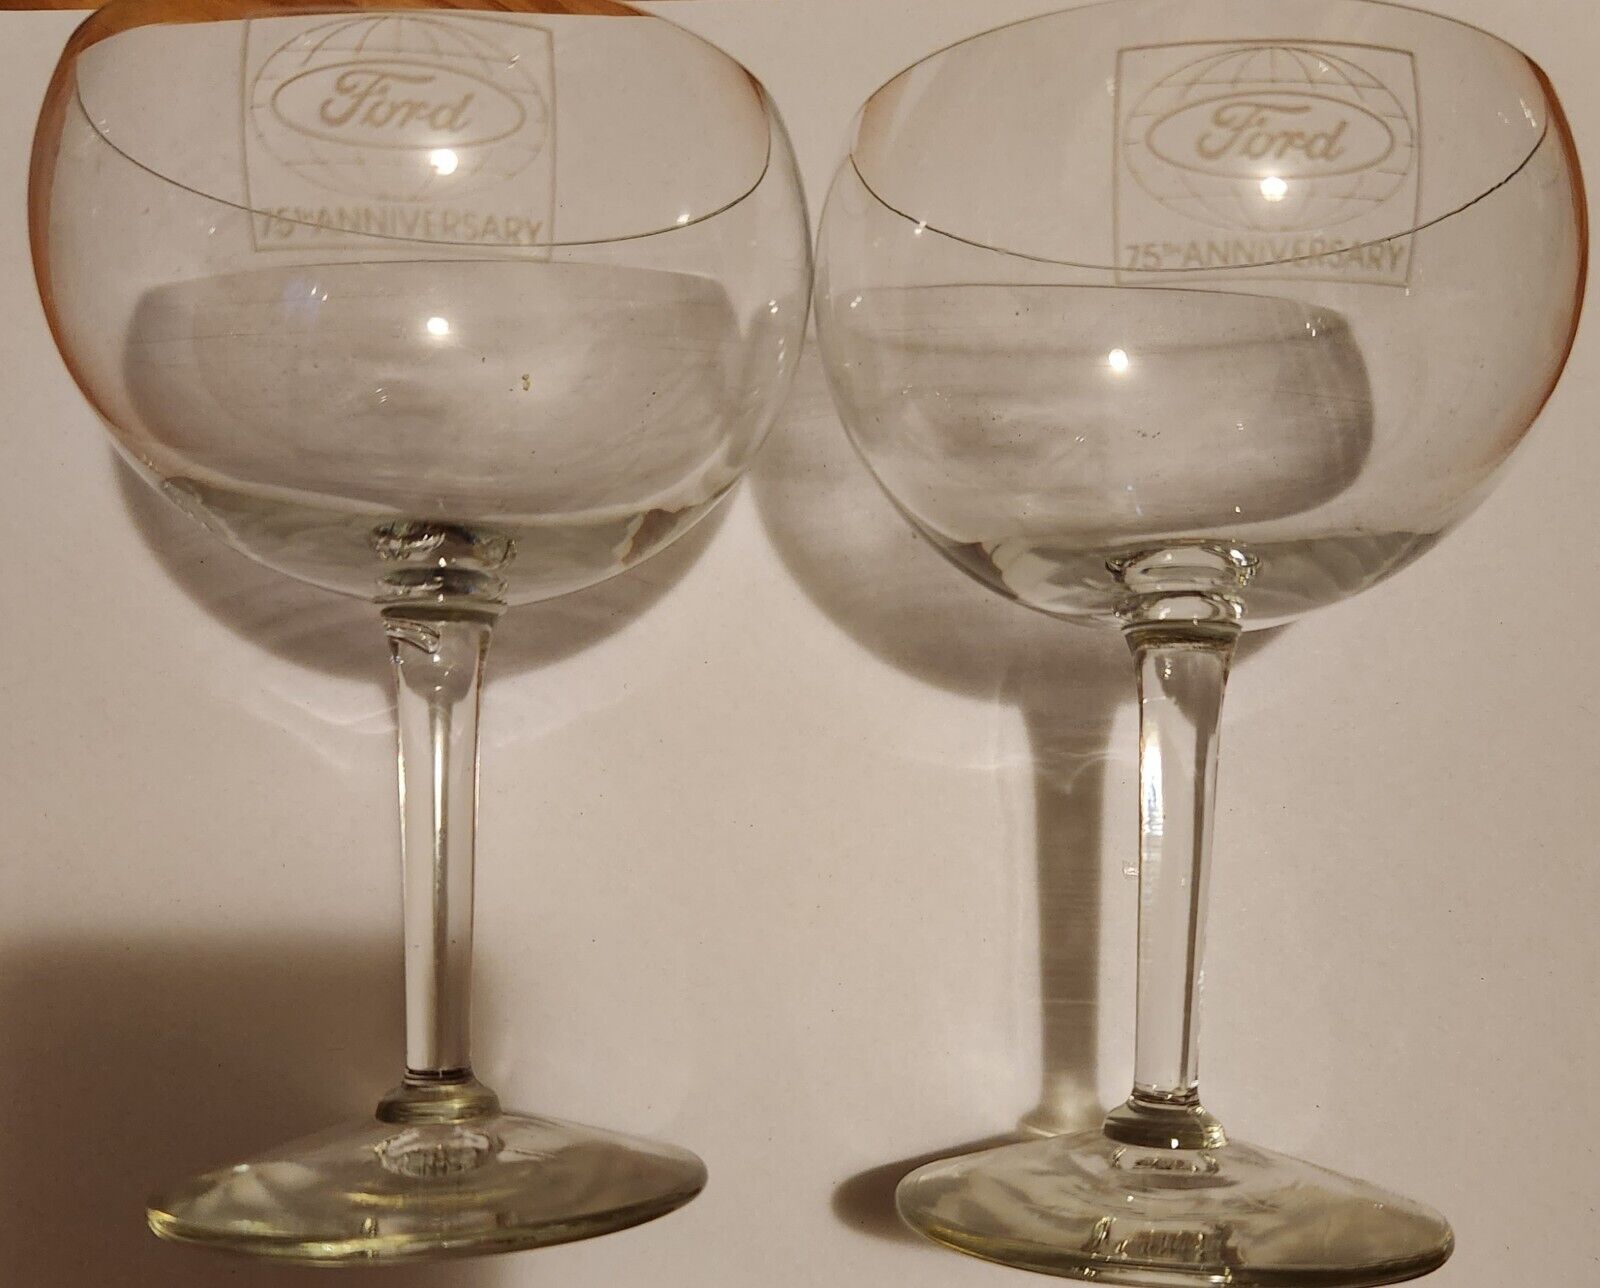 Vintage Pair Ford 75th Anniversary Etched Long Stem Wine Glasses